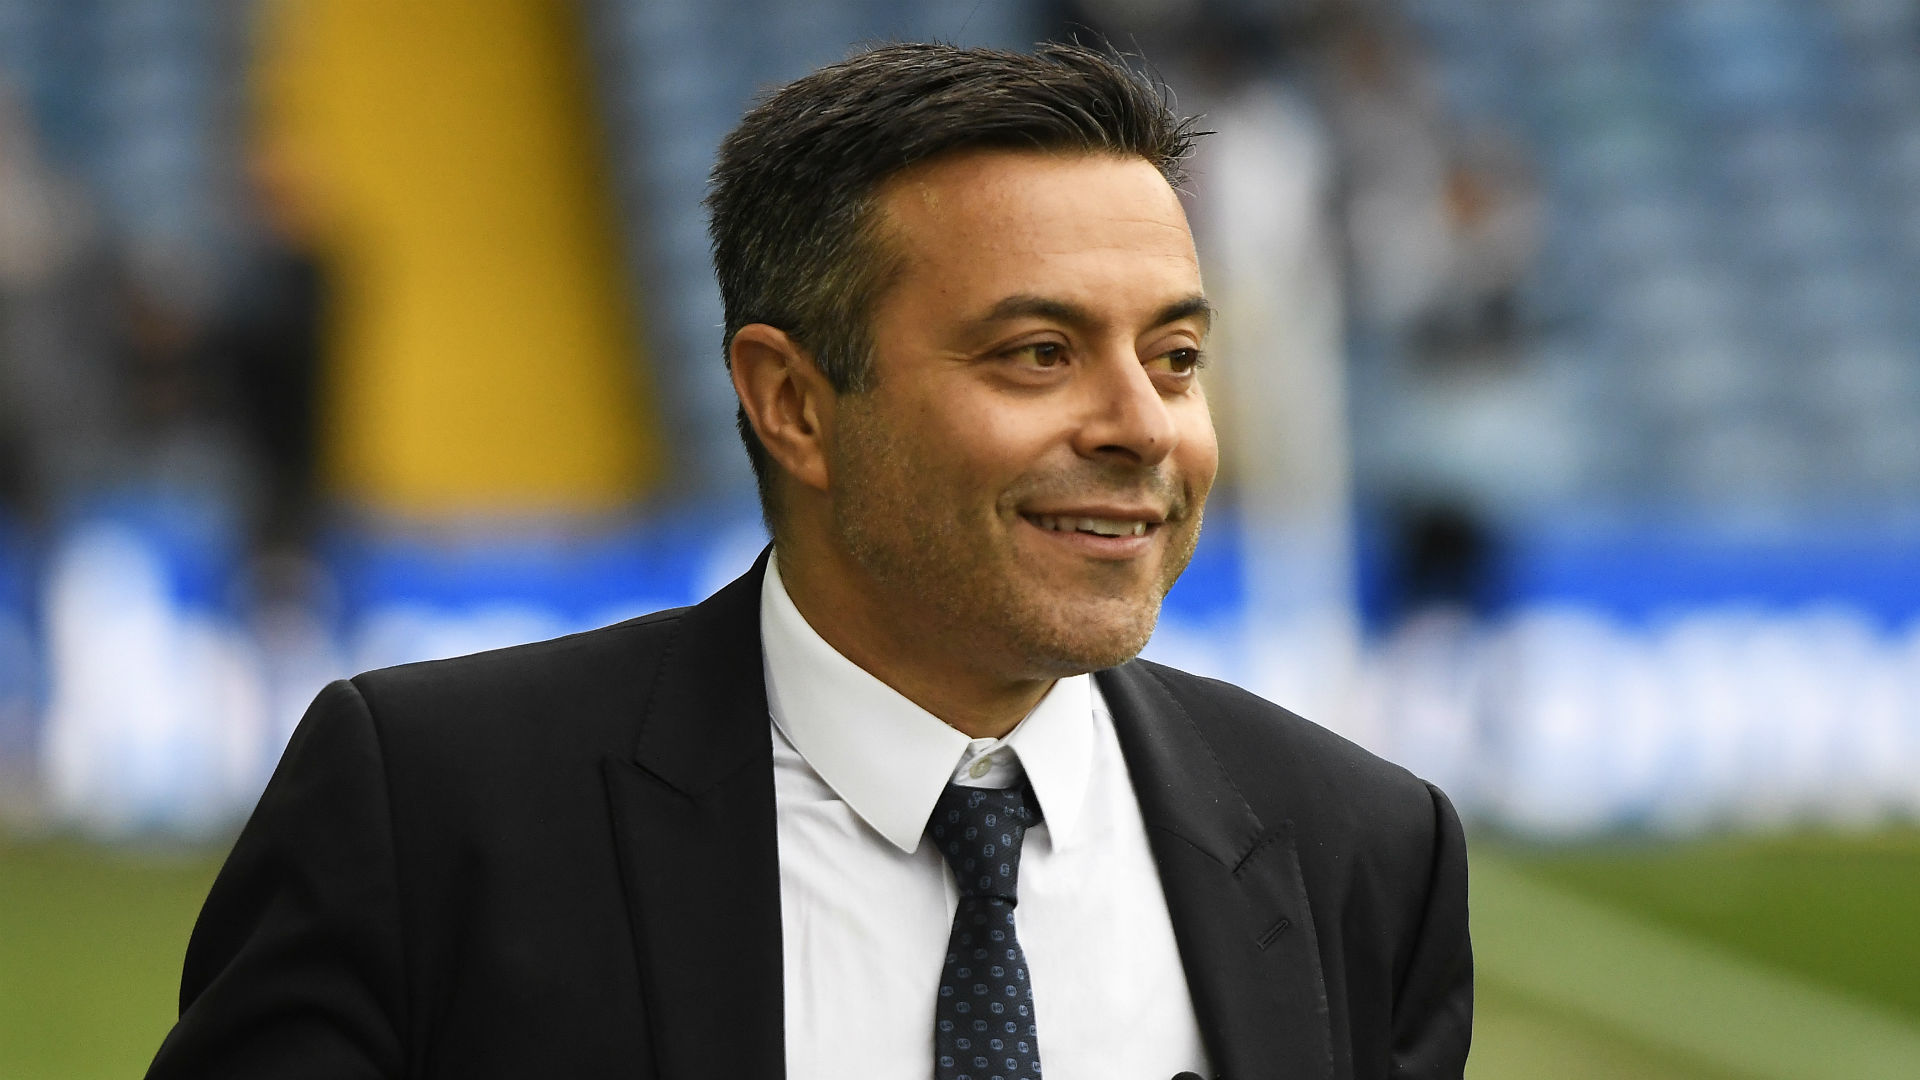 Leeds United owner Andrea Radrizzani says he is weighing up three offers of investment into the Championship club.